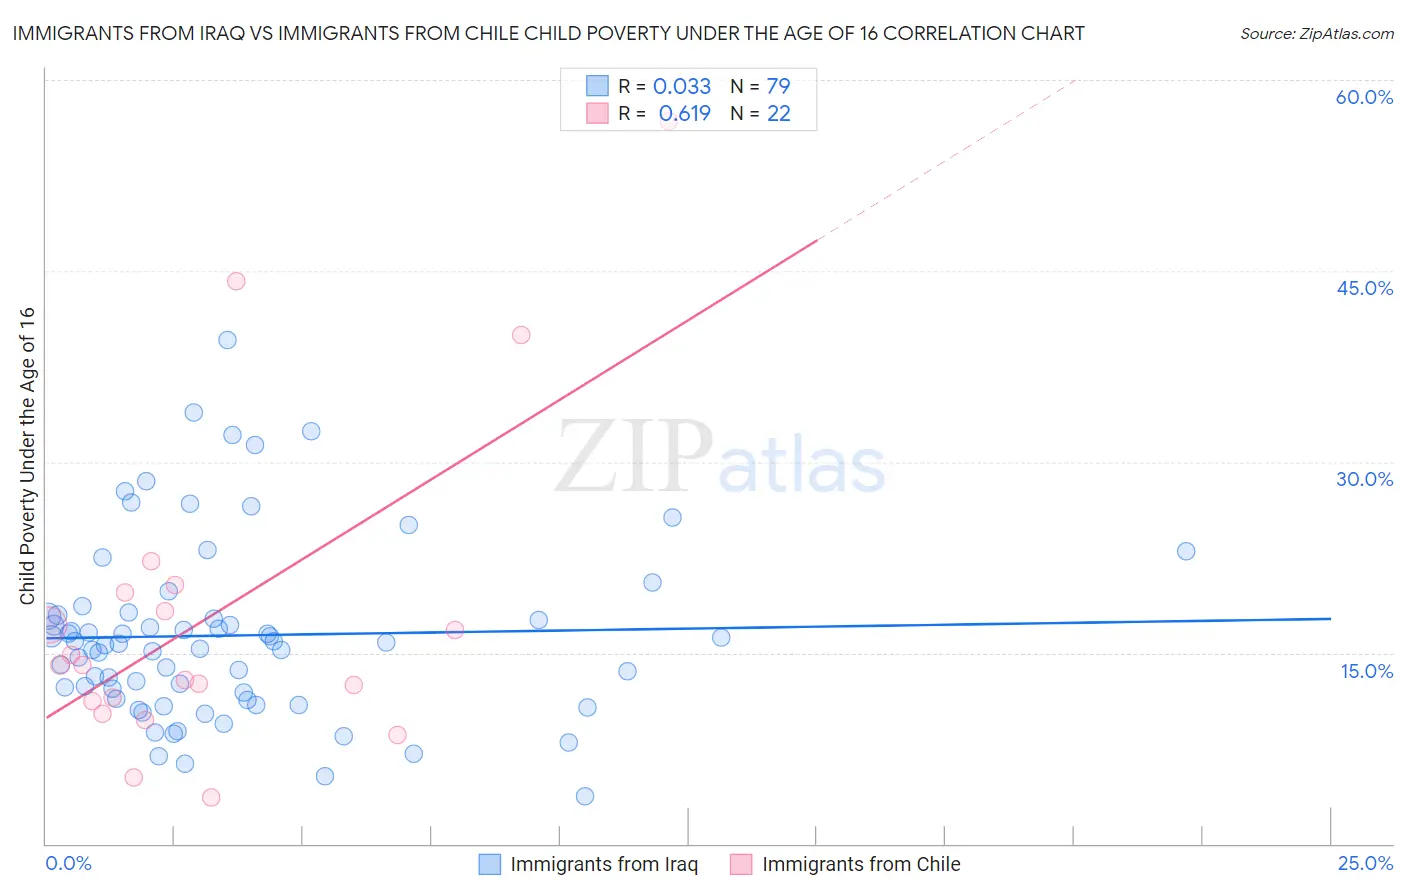 Immigrants from Iraq vs Immigrants from Chile Child Poverty Under the Age of 16